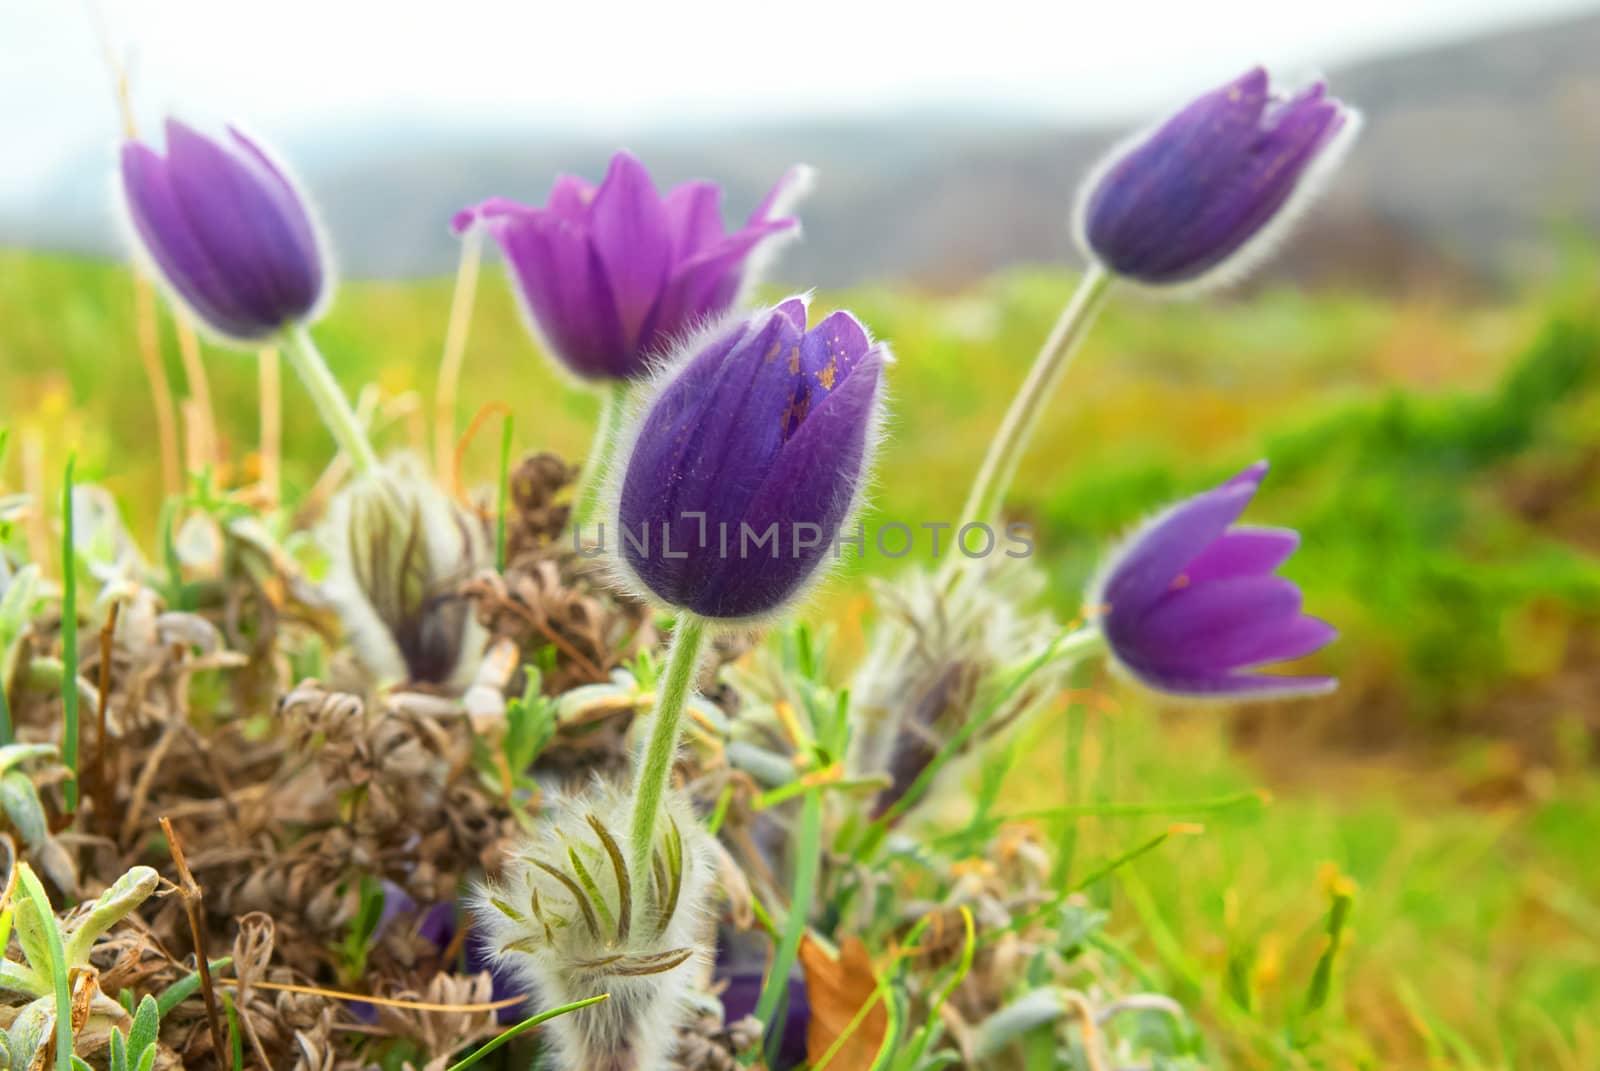 Pasqueflowers (Pulsatilla patens) on the field with grass